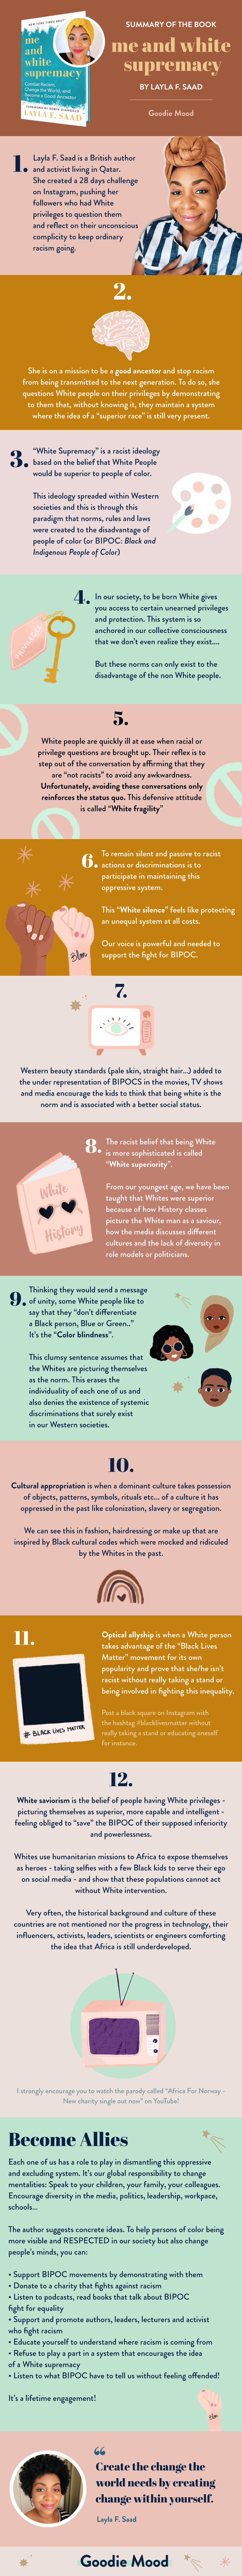 Summary of the book "Me and white supremacy" by Layla F. Saad - infographic